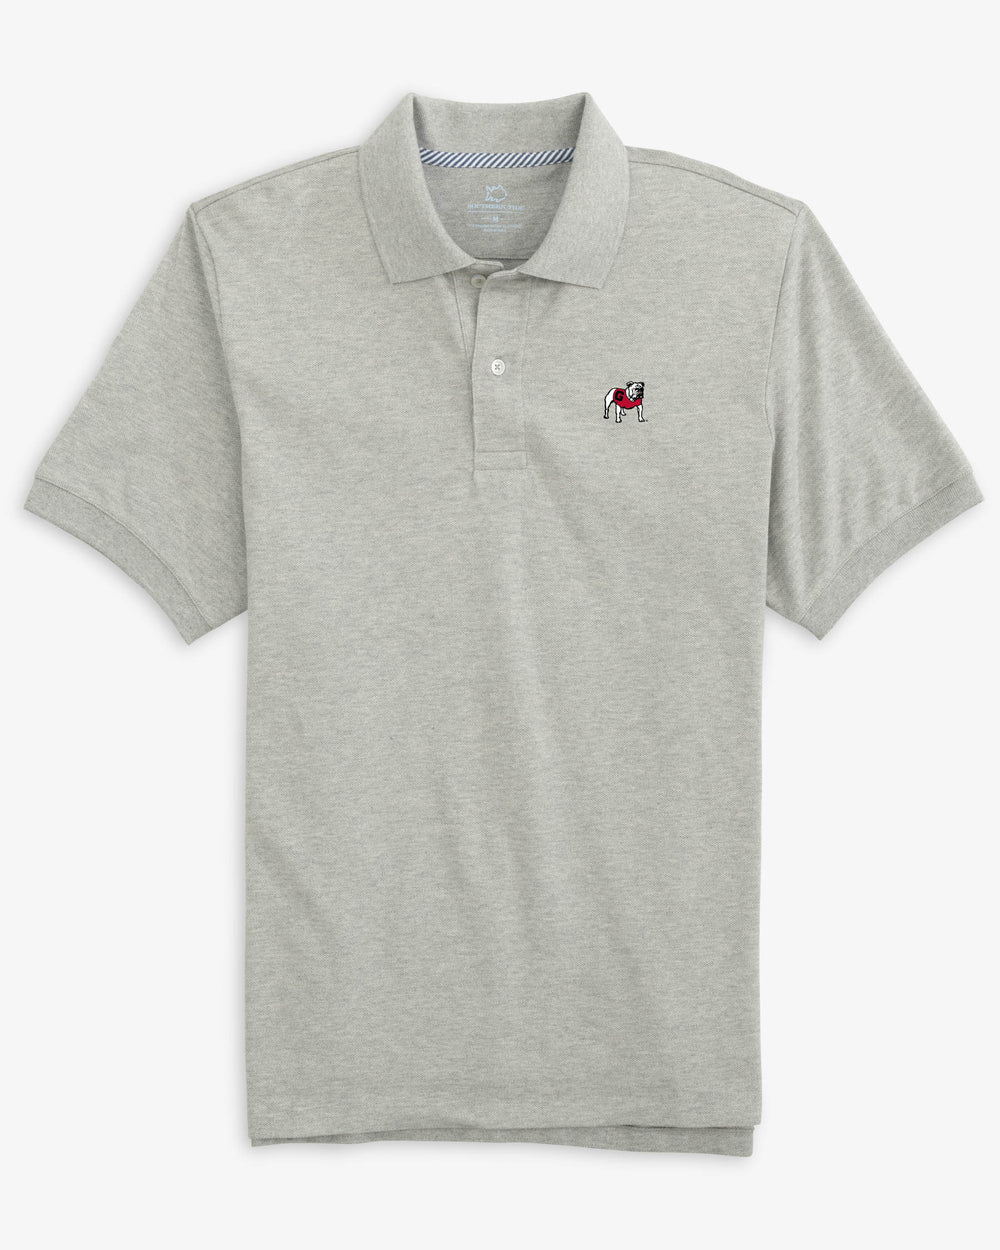 The front view of the Georgia Bulldogs New Short Sleeve Skipjack Polo by Southern Tide - Heather Grey